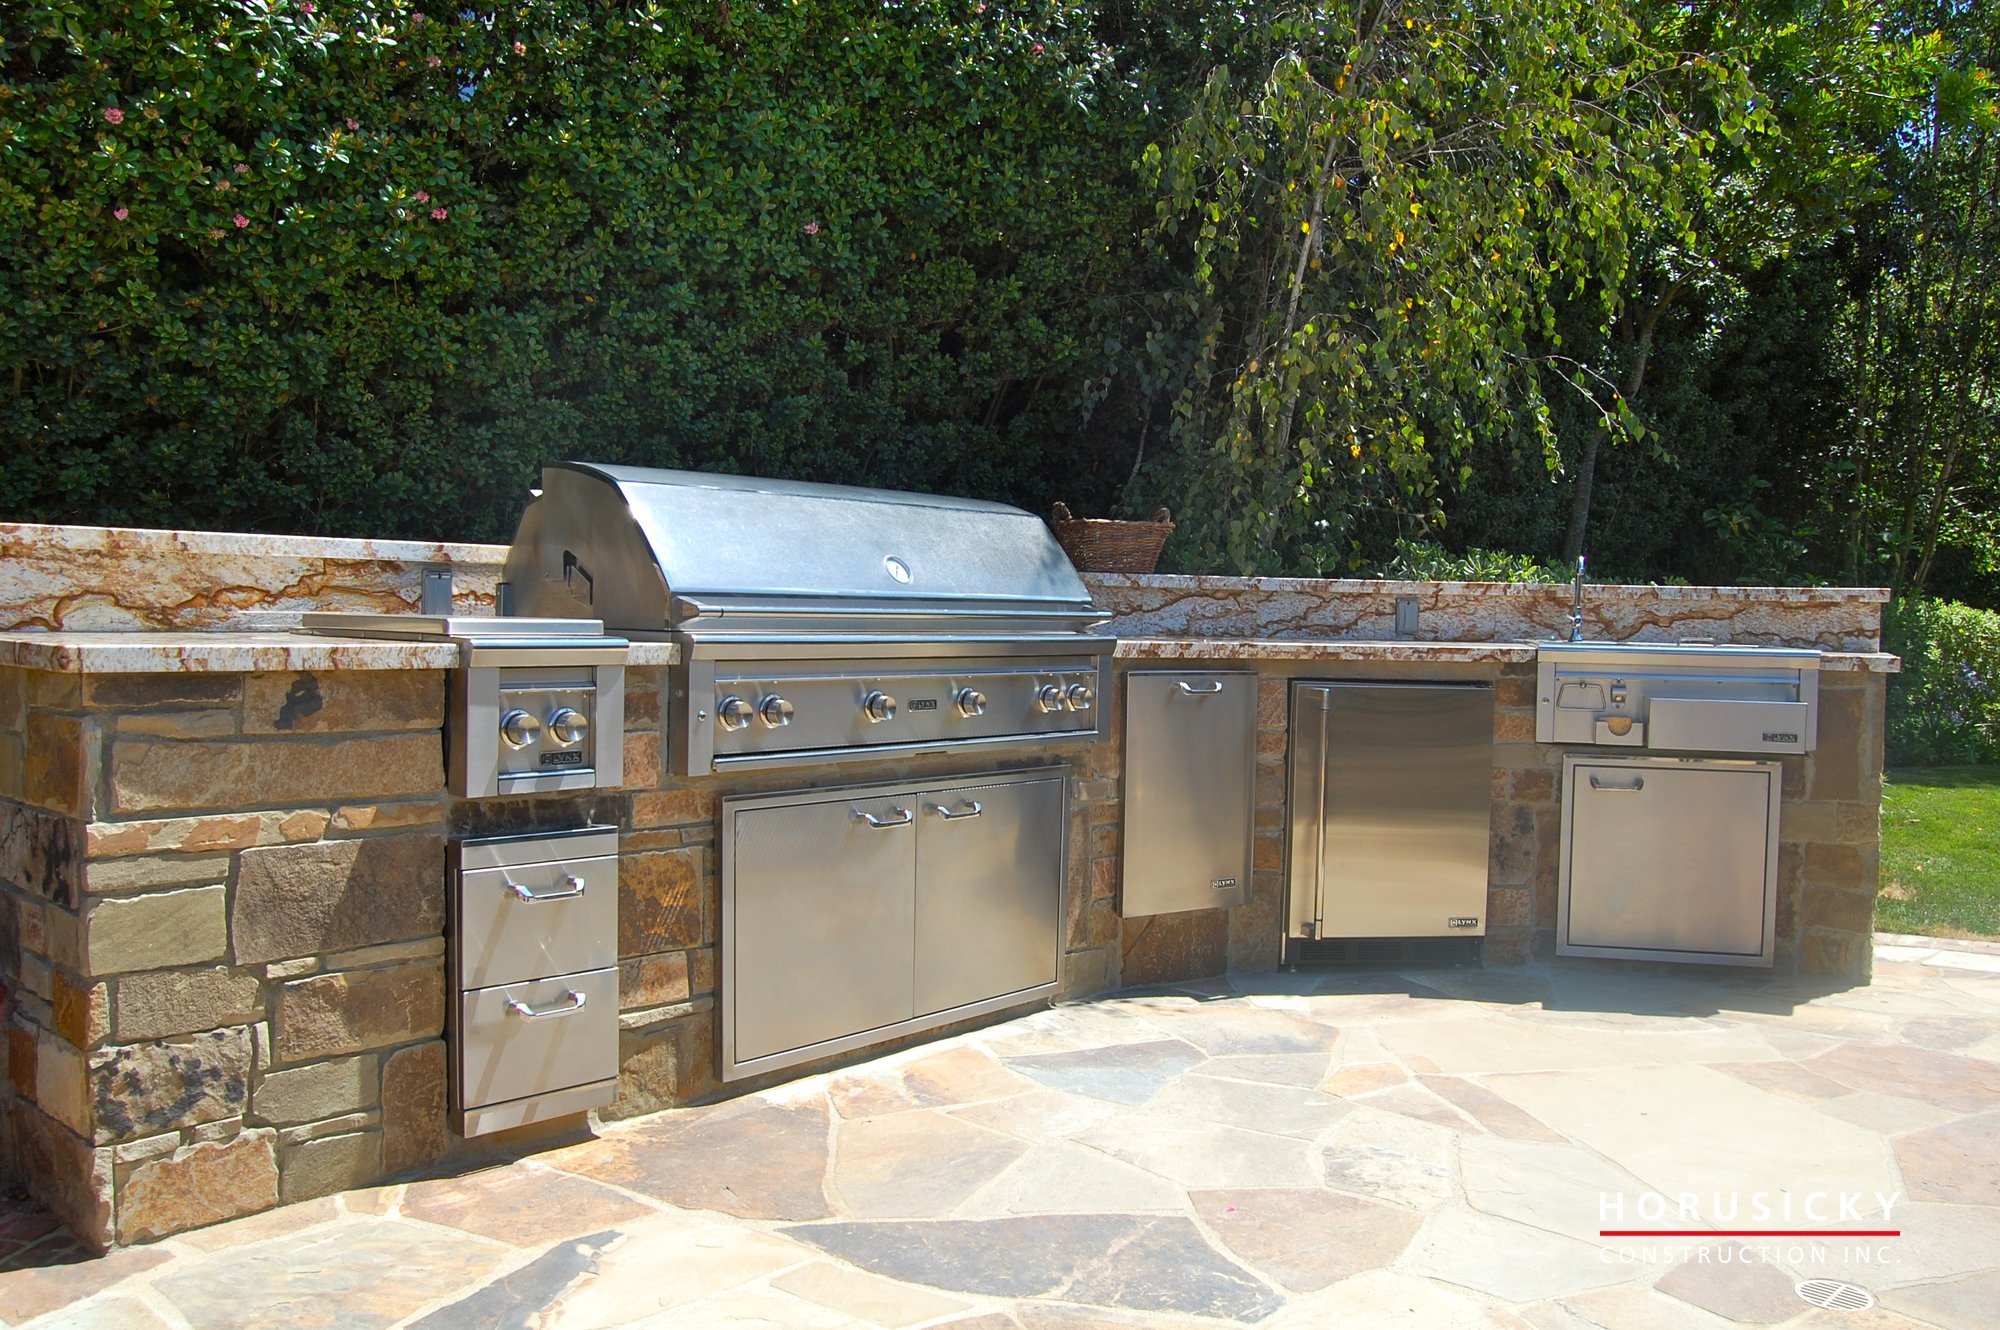 Kitchen-and-bbq-grill-by-horusicky-construction-002